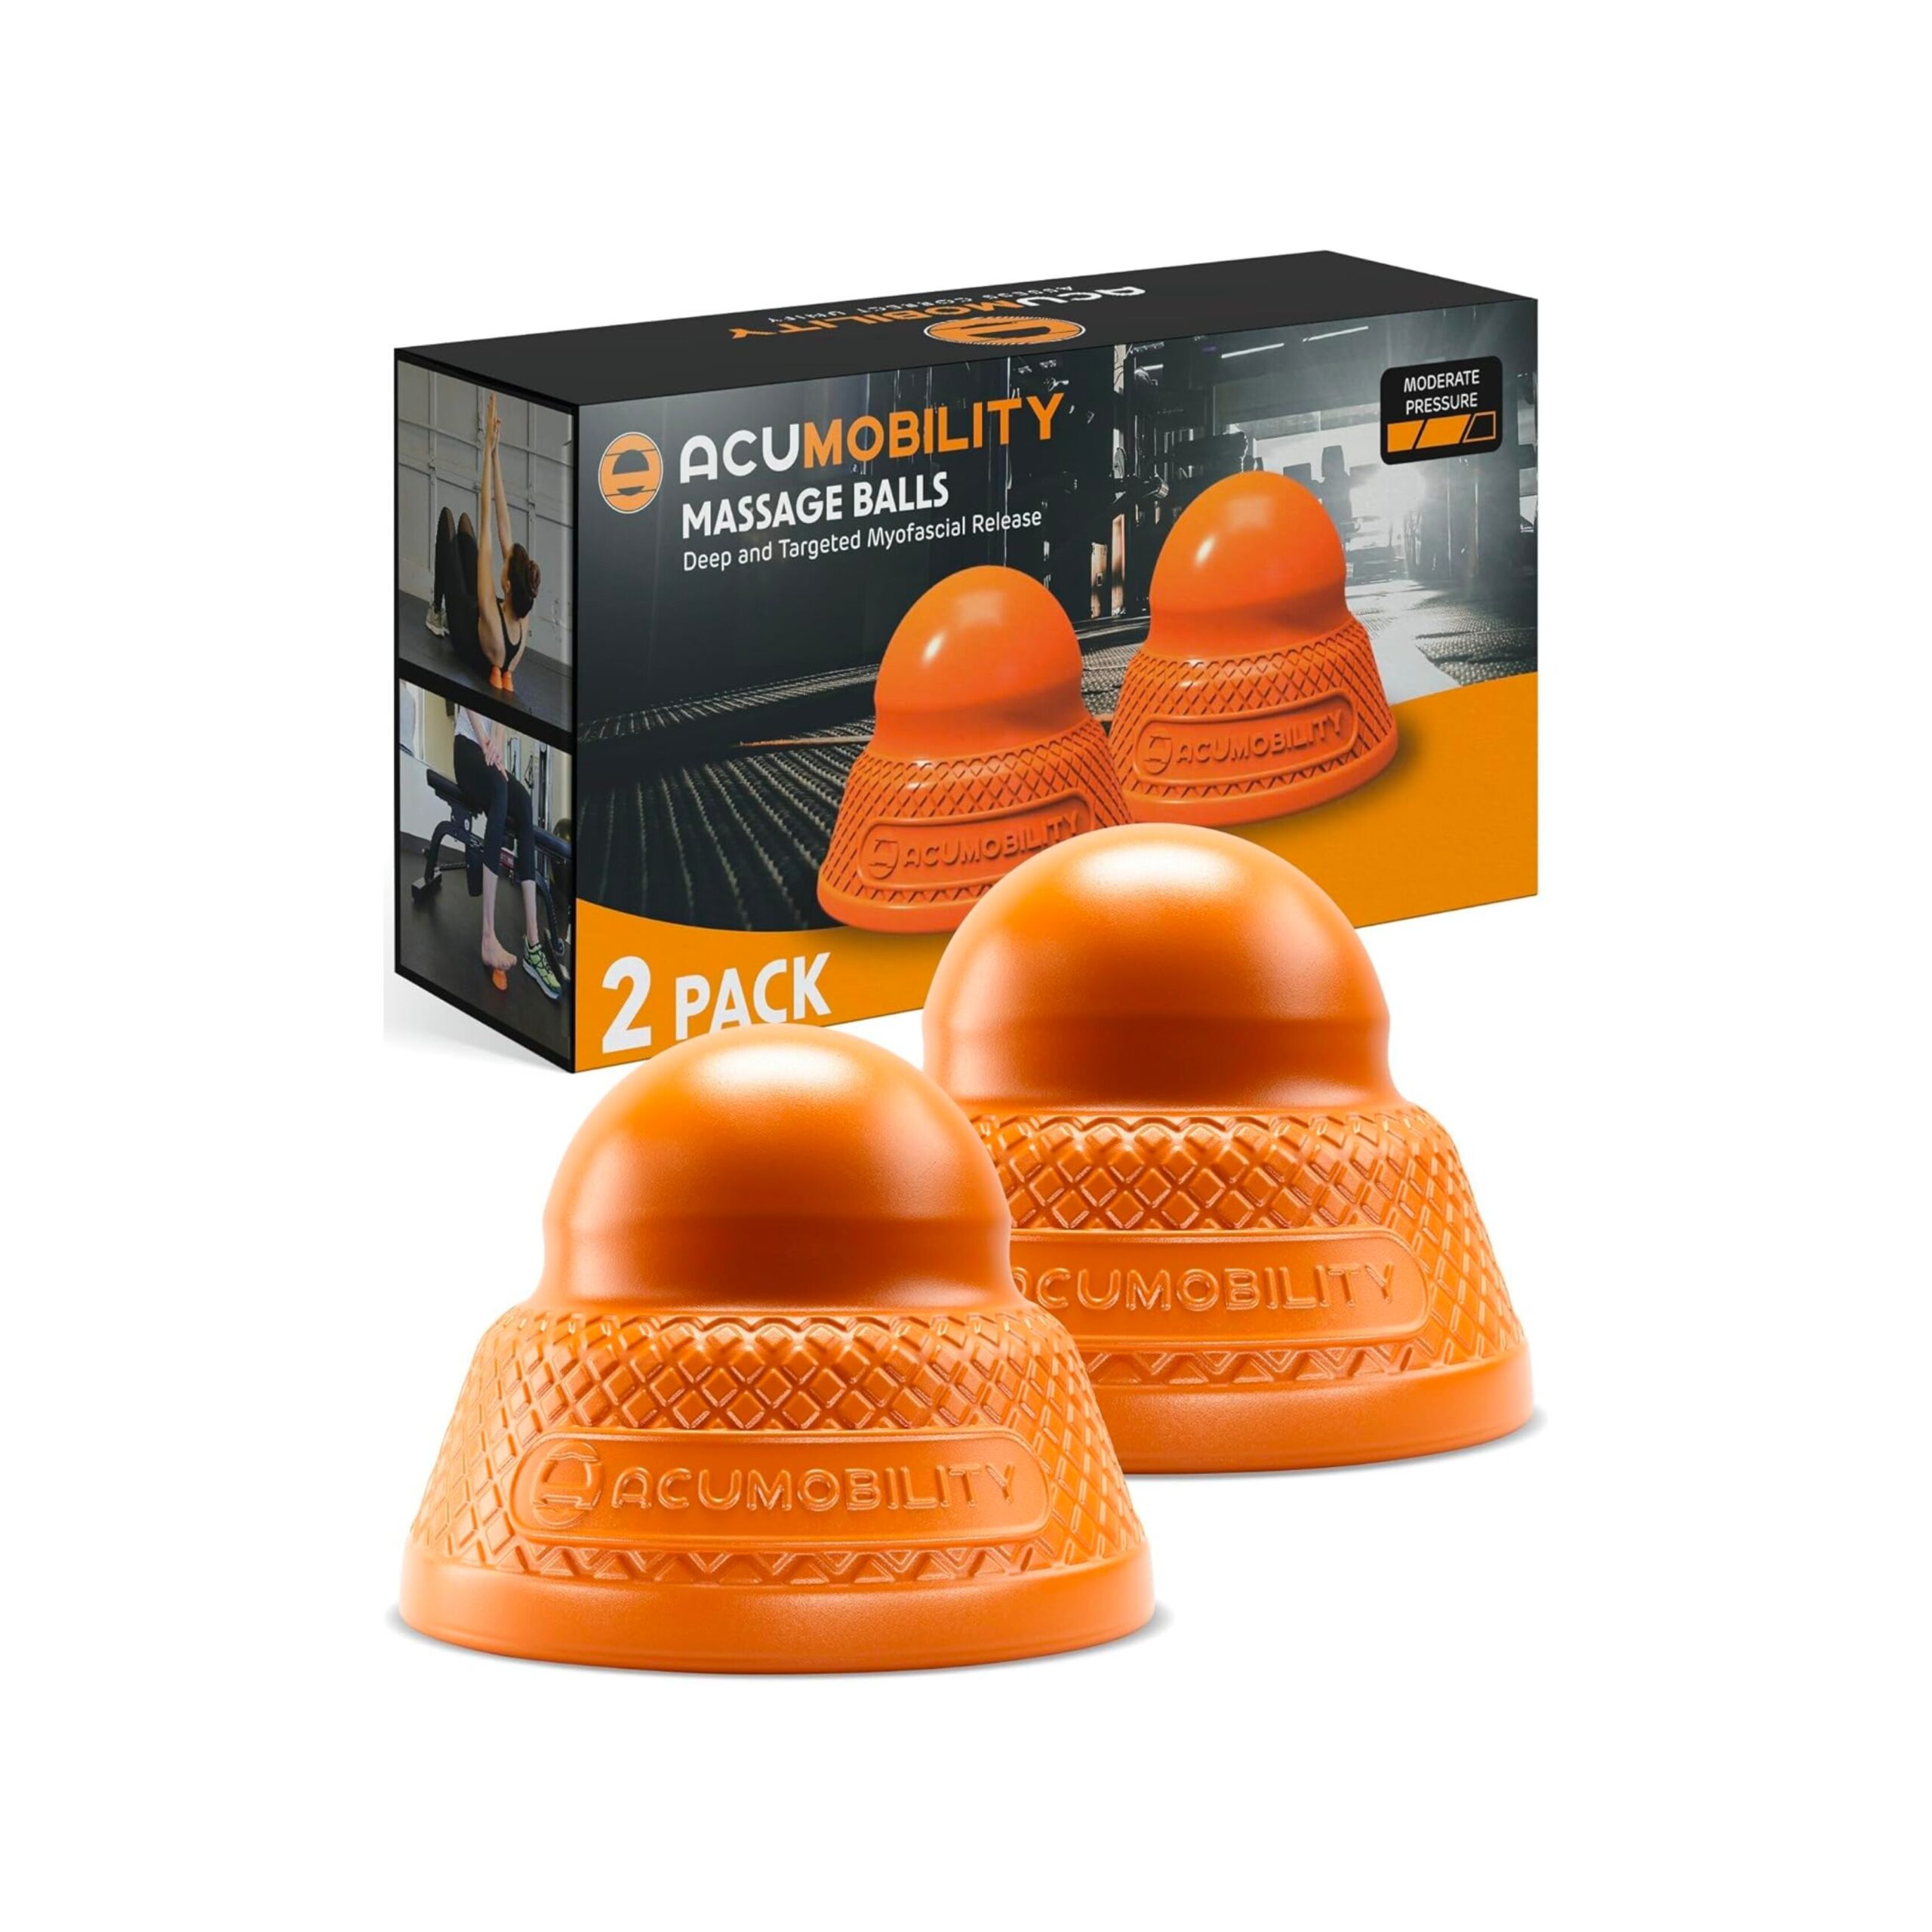 accumobility balls with package